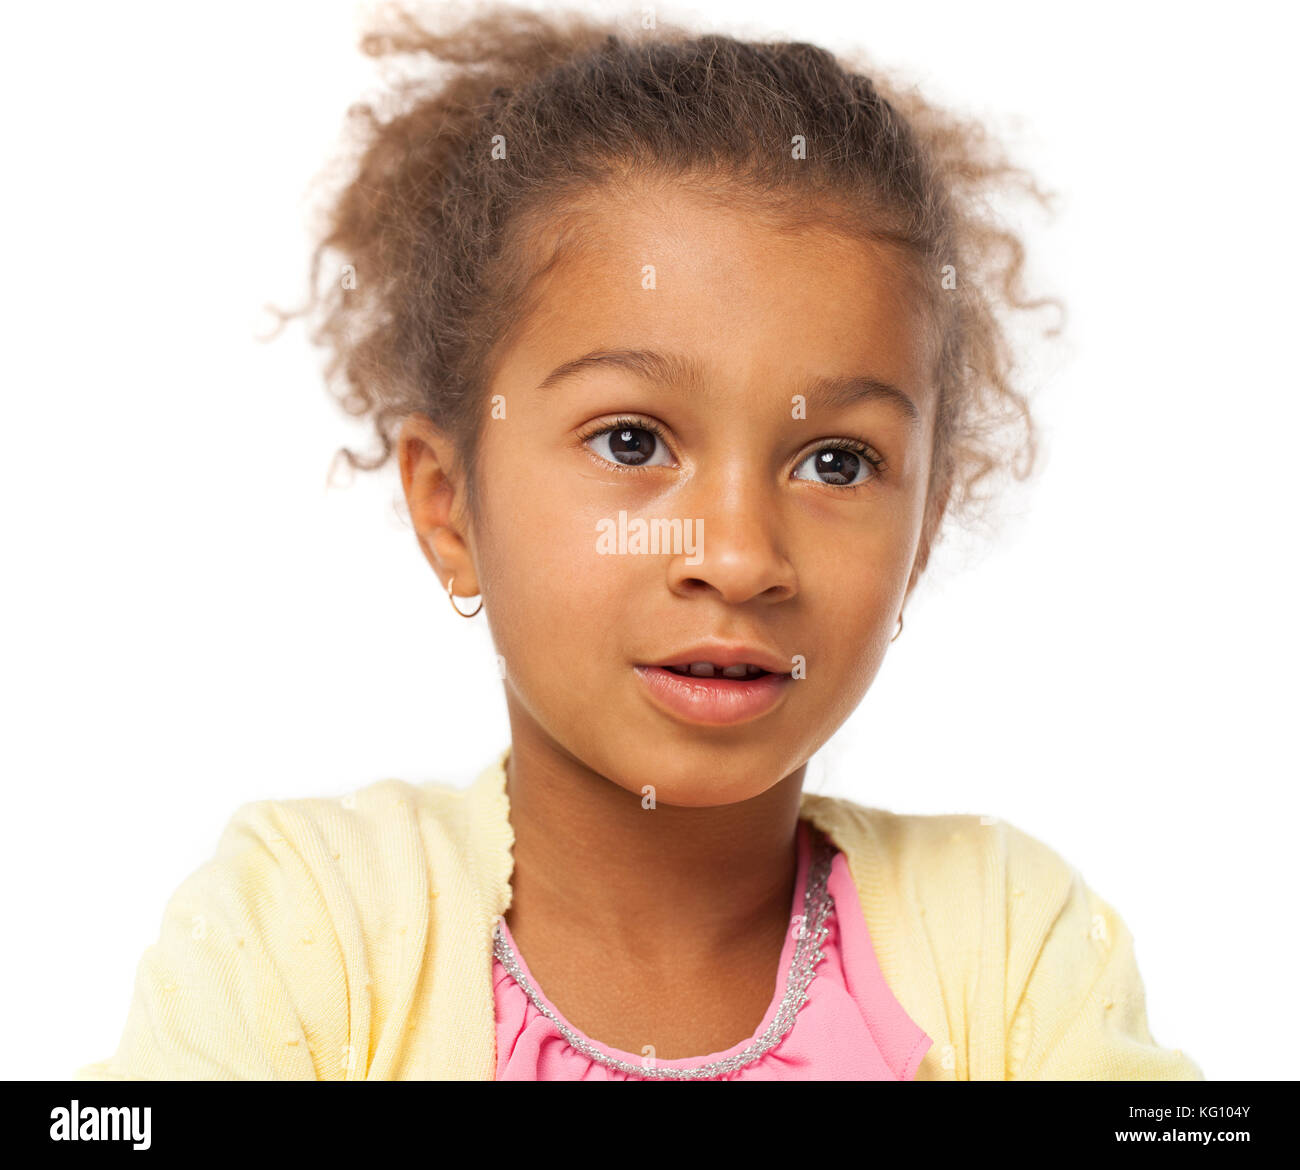 Smiling five Years Old Adorable African American Girl Head and Shoulders  Portrait on White Background Stock Photo - Alamy